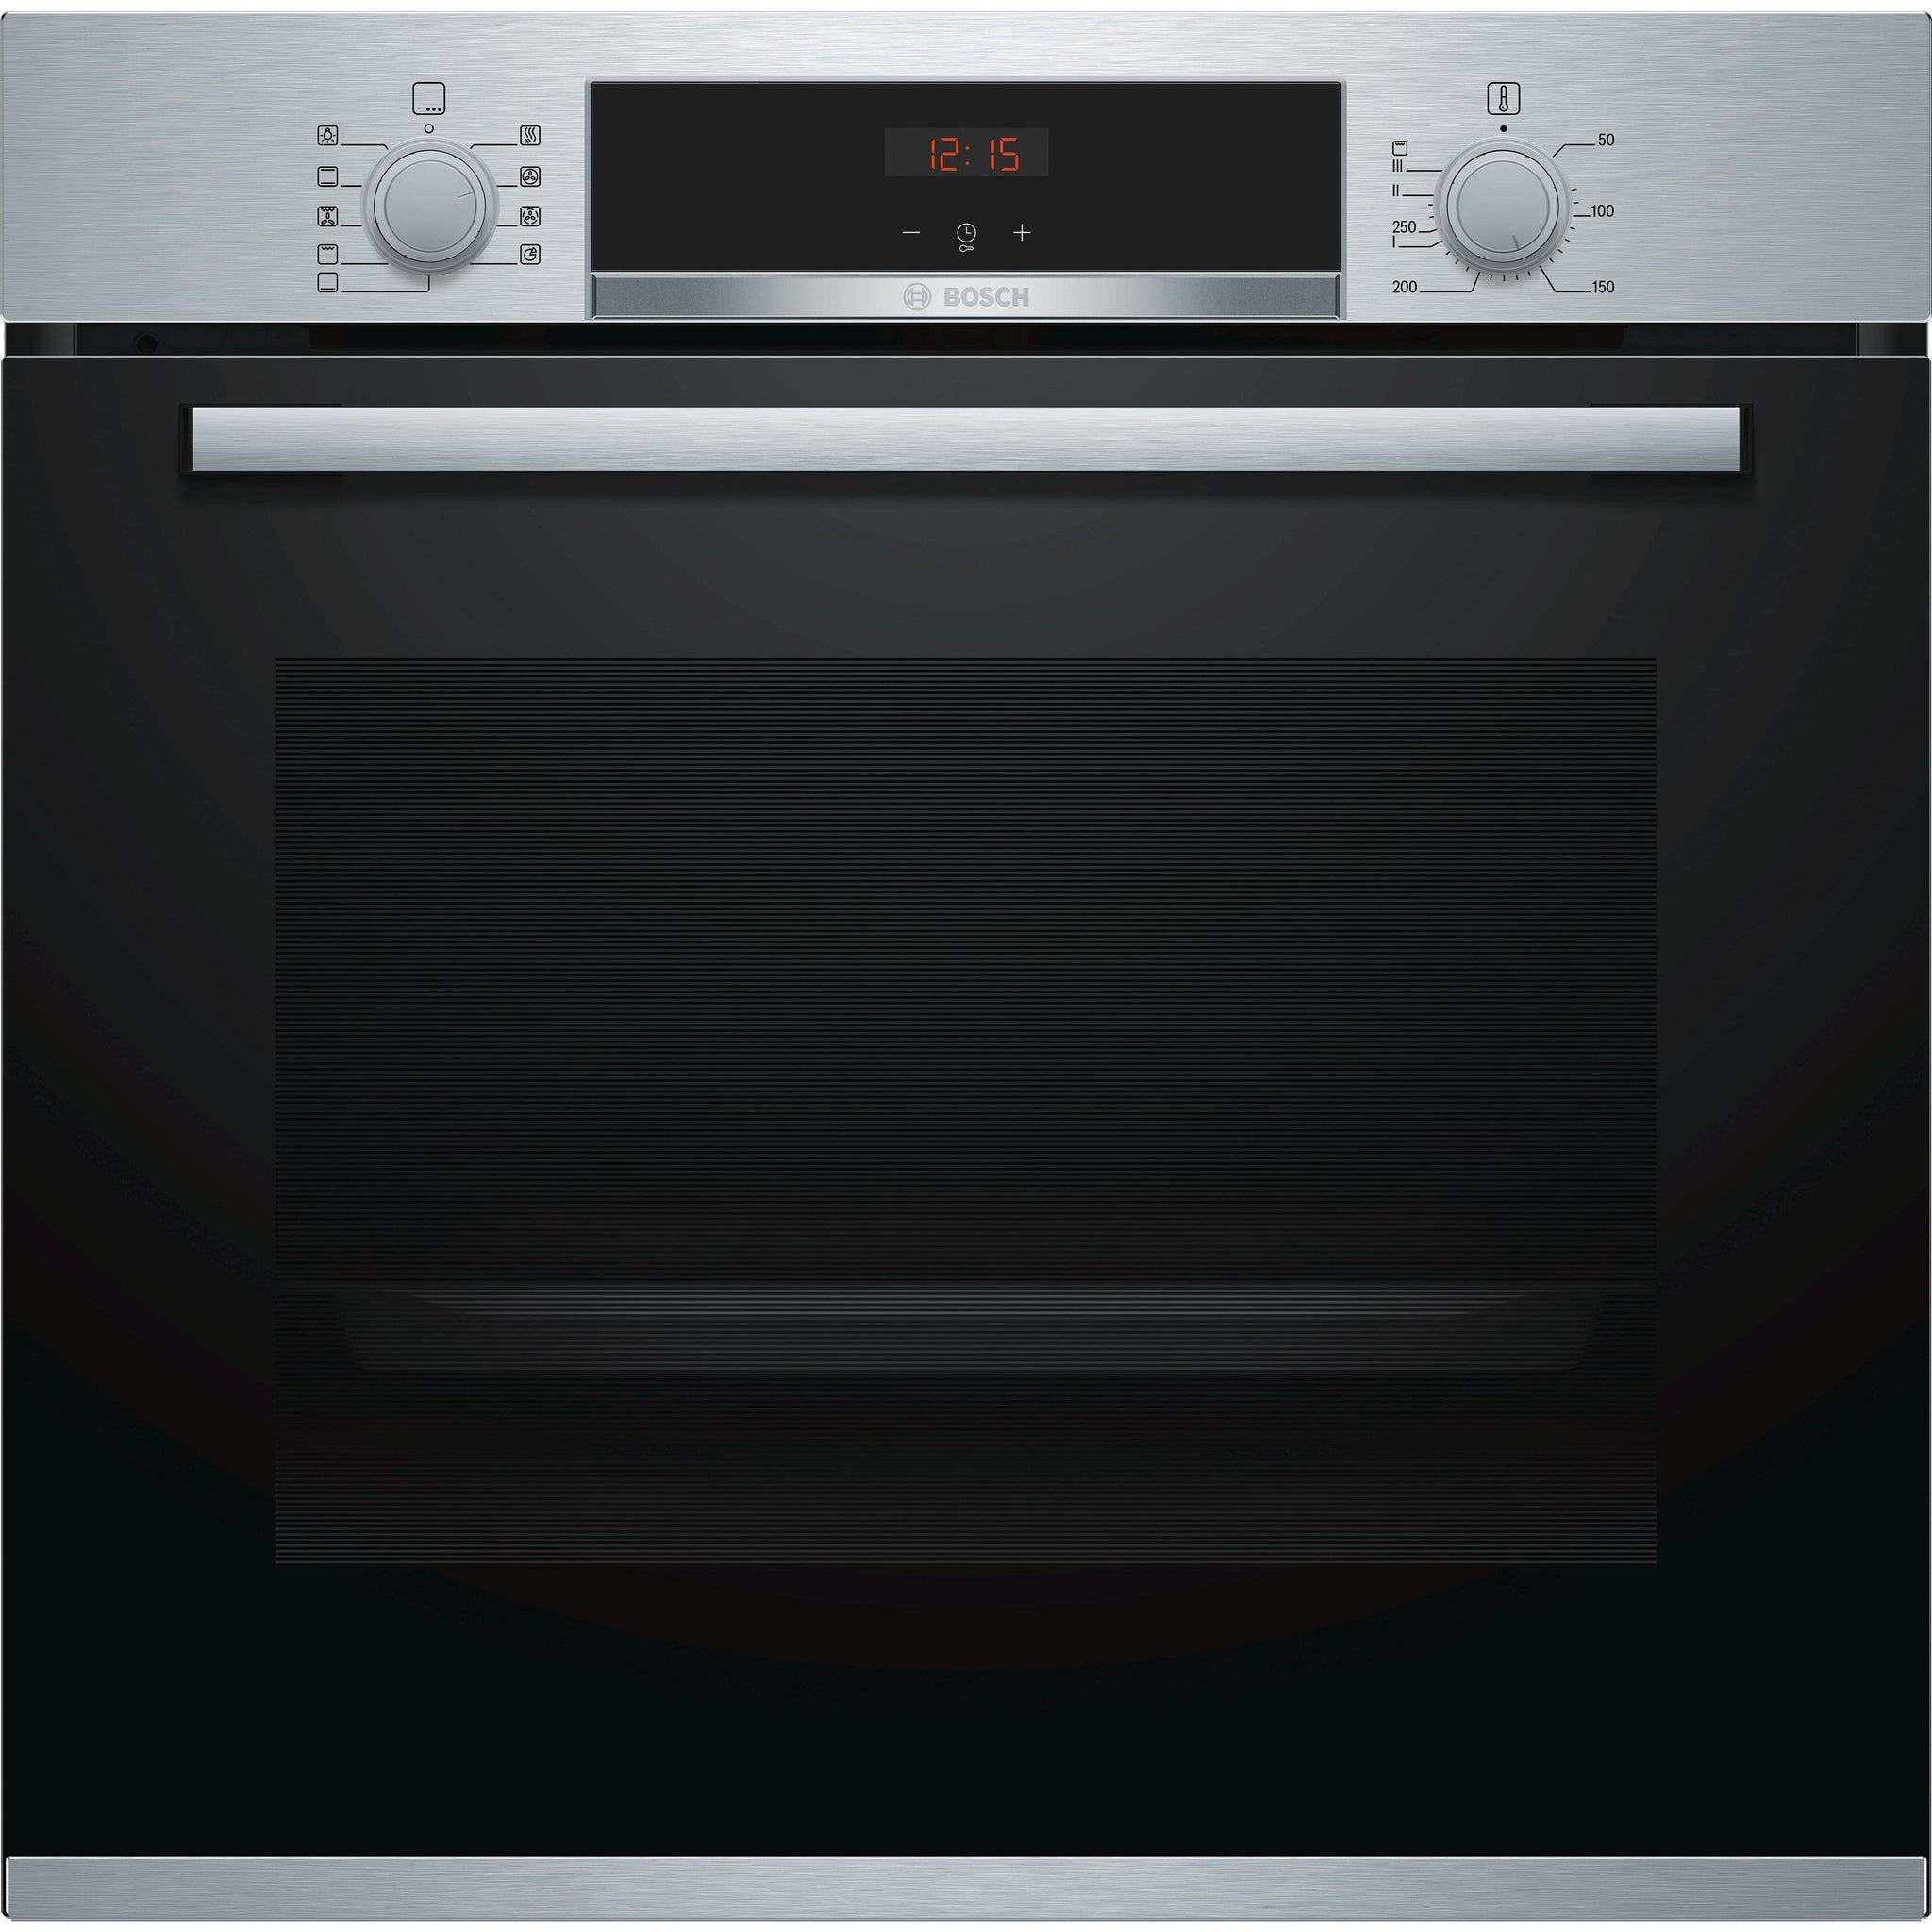 Bosch Hbs534bs0b Serie 4 Builtin Single Oven Euronics Limited Promotional Offer